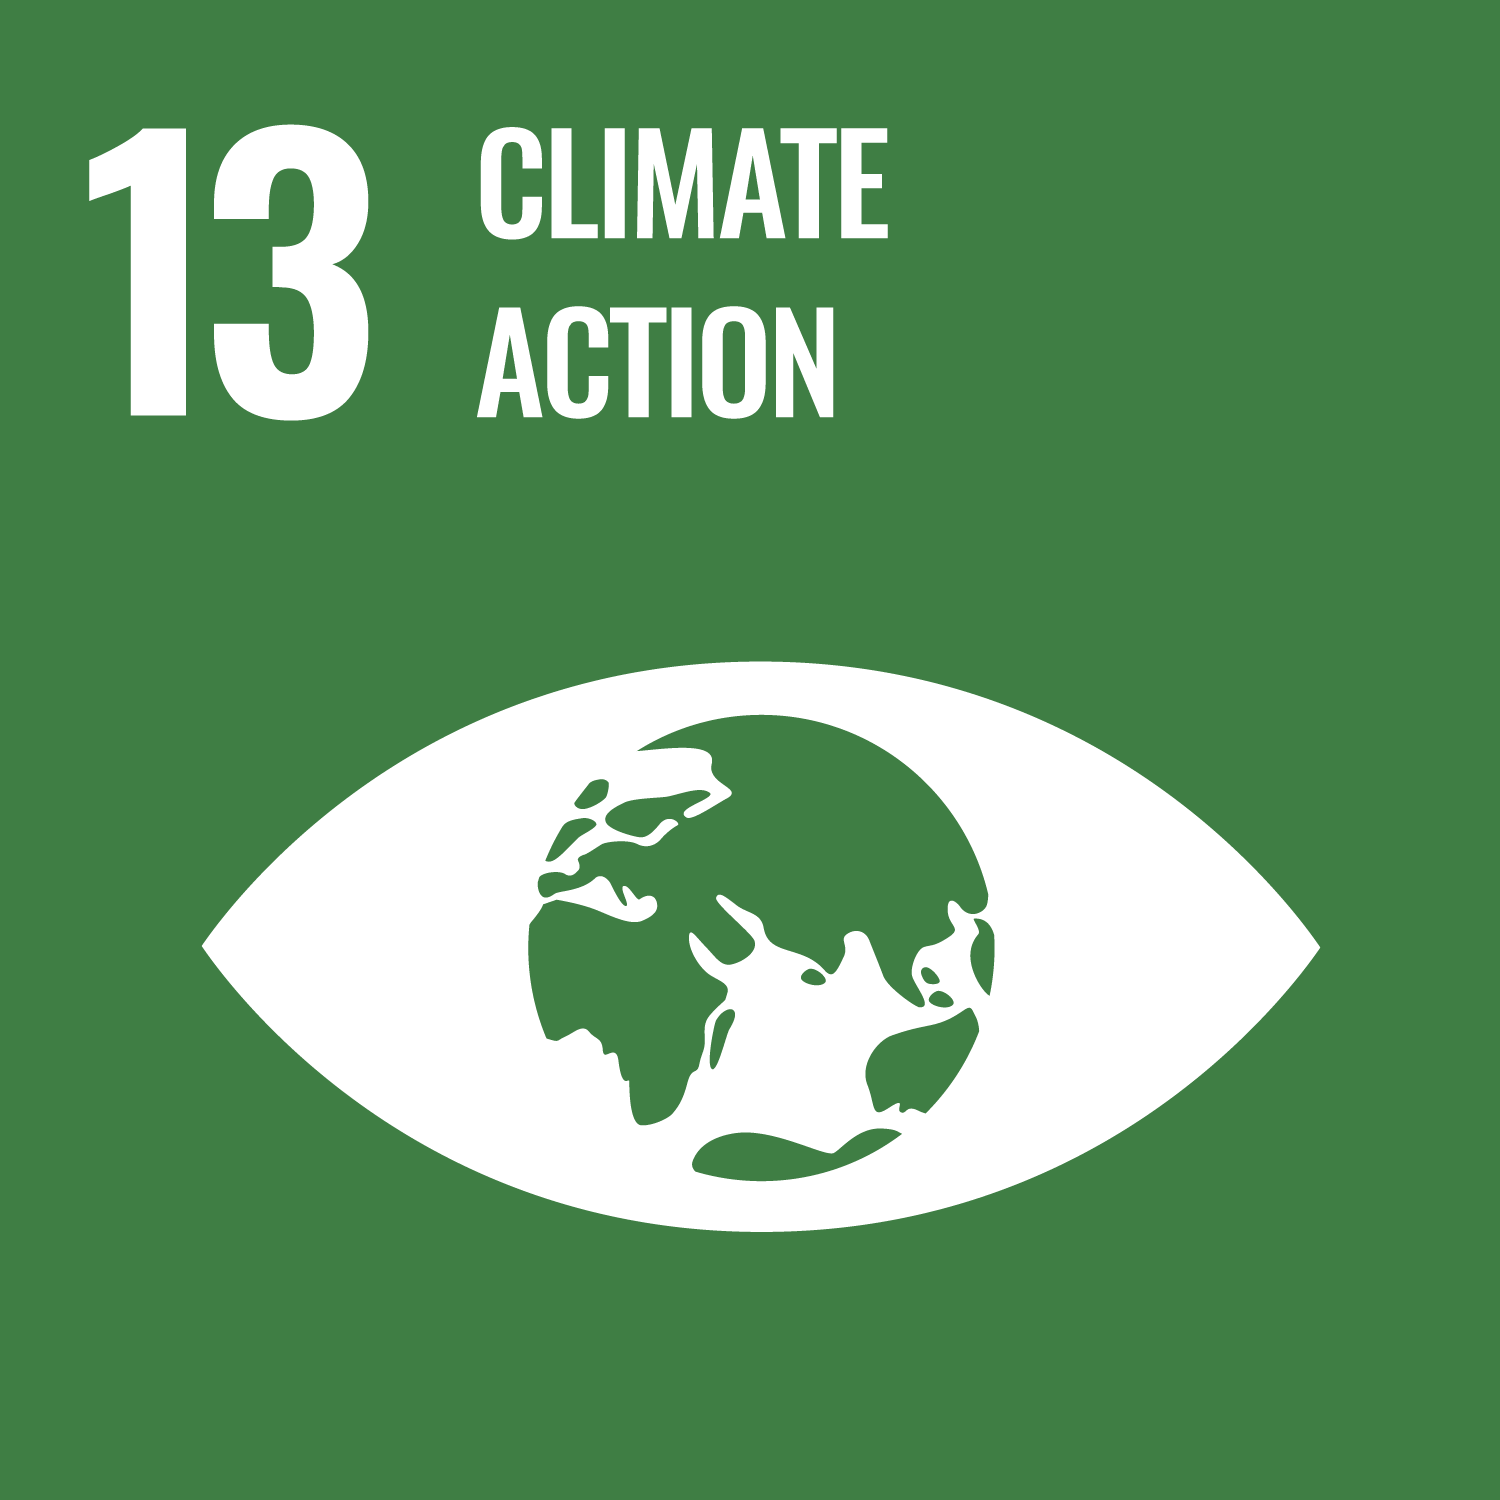 the phrase 13 climate action in white on a green background